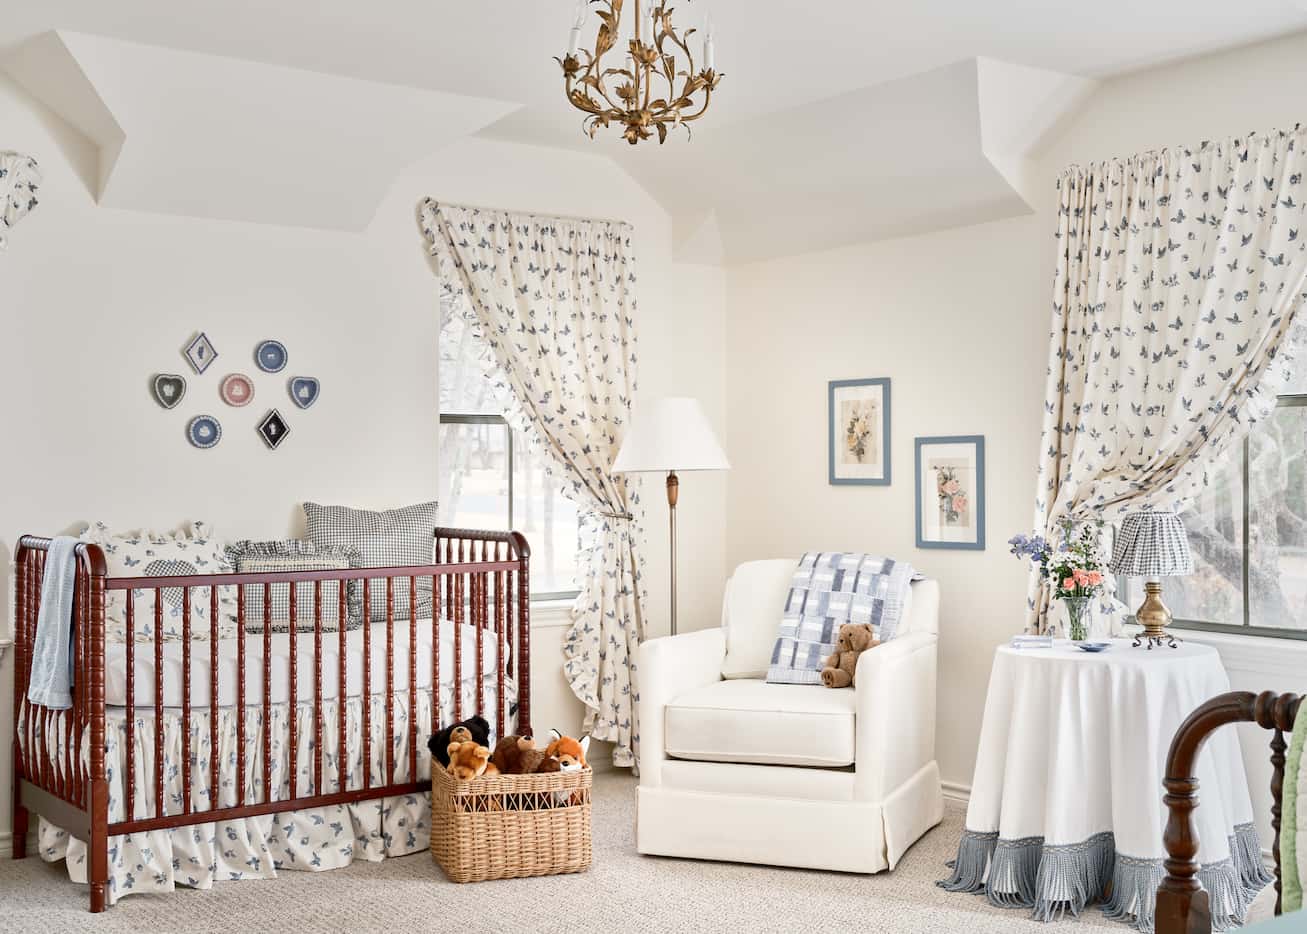 Baby nursery with a blue and white theme and a red crib.